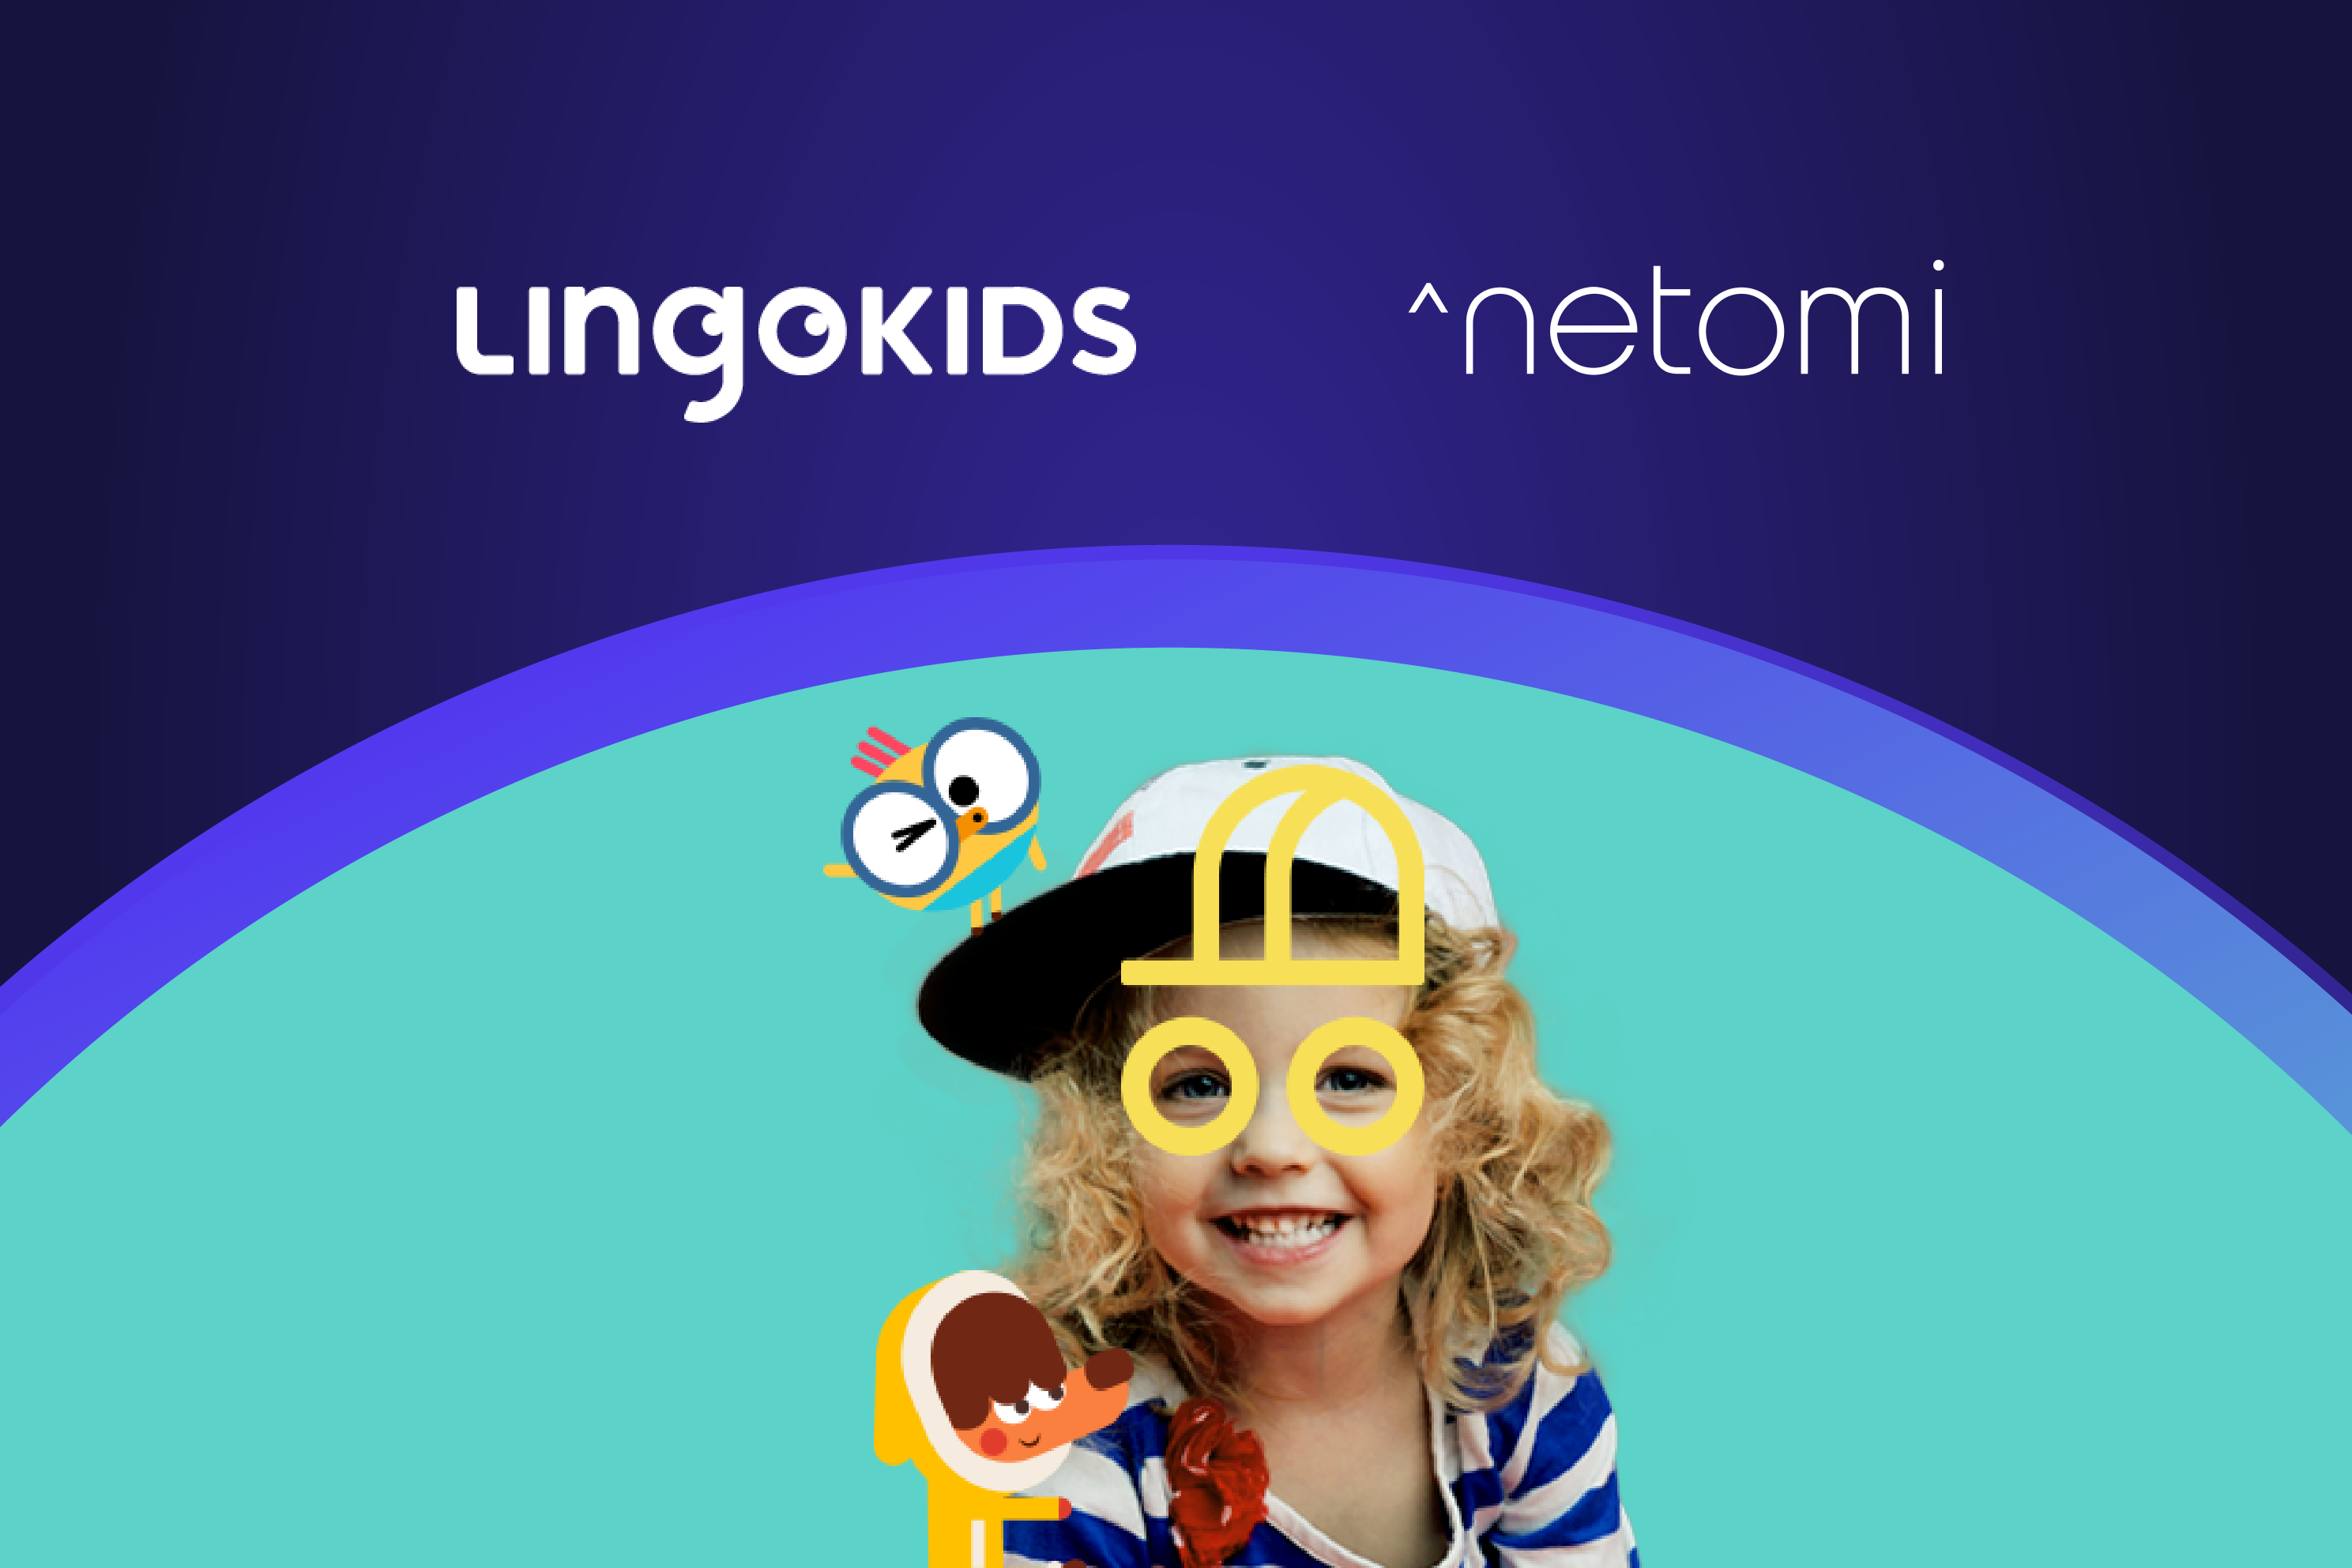 Lingokids schools the customer and agent experience with AI